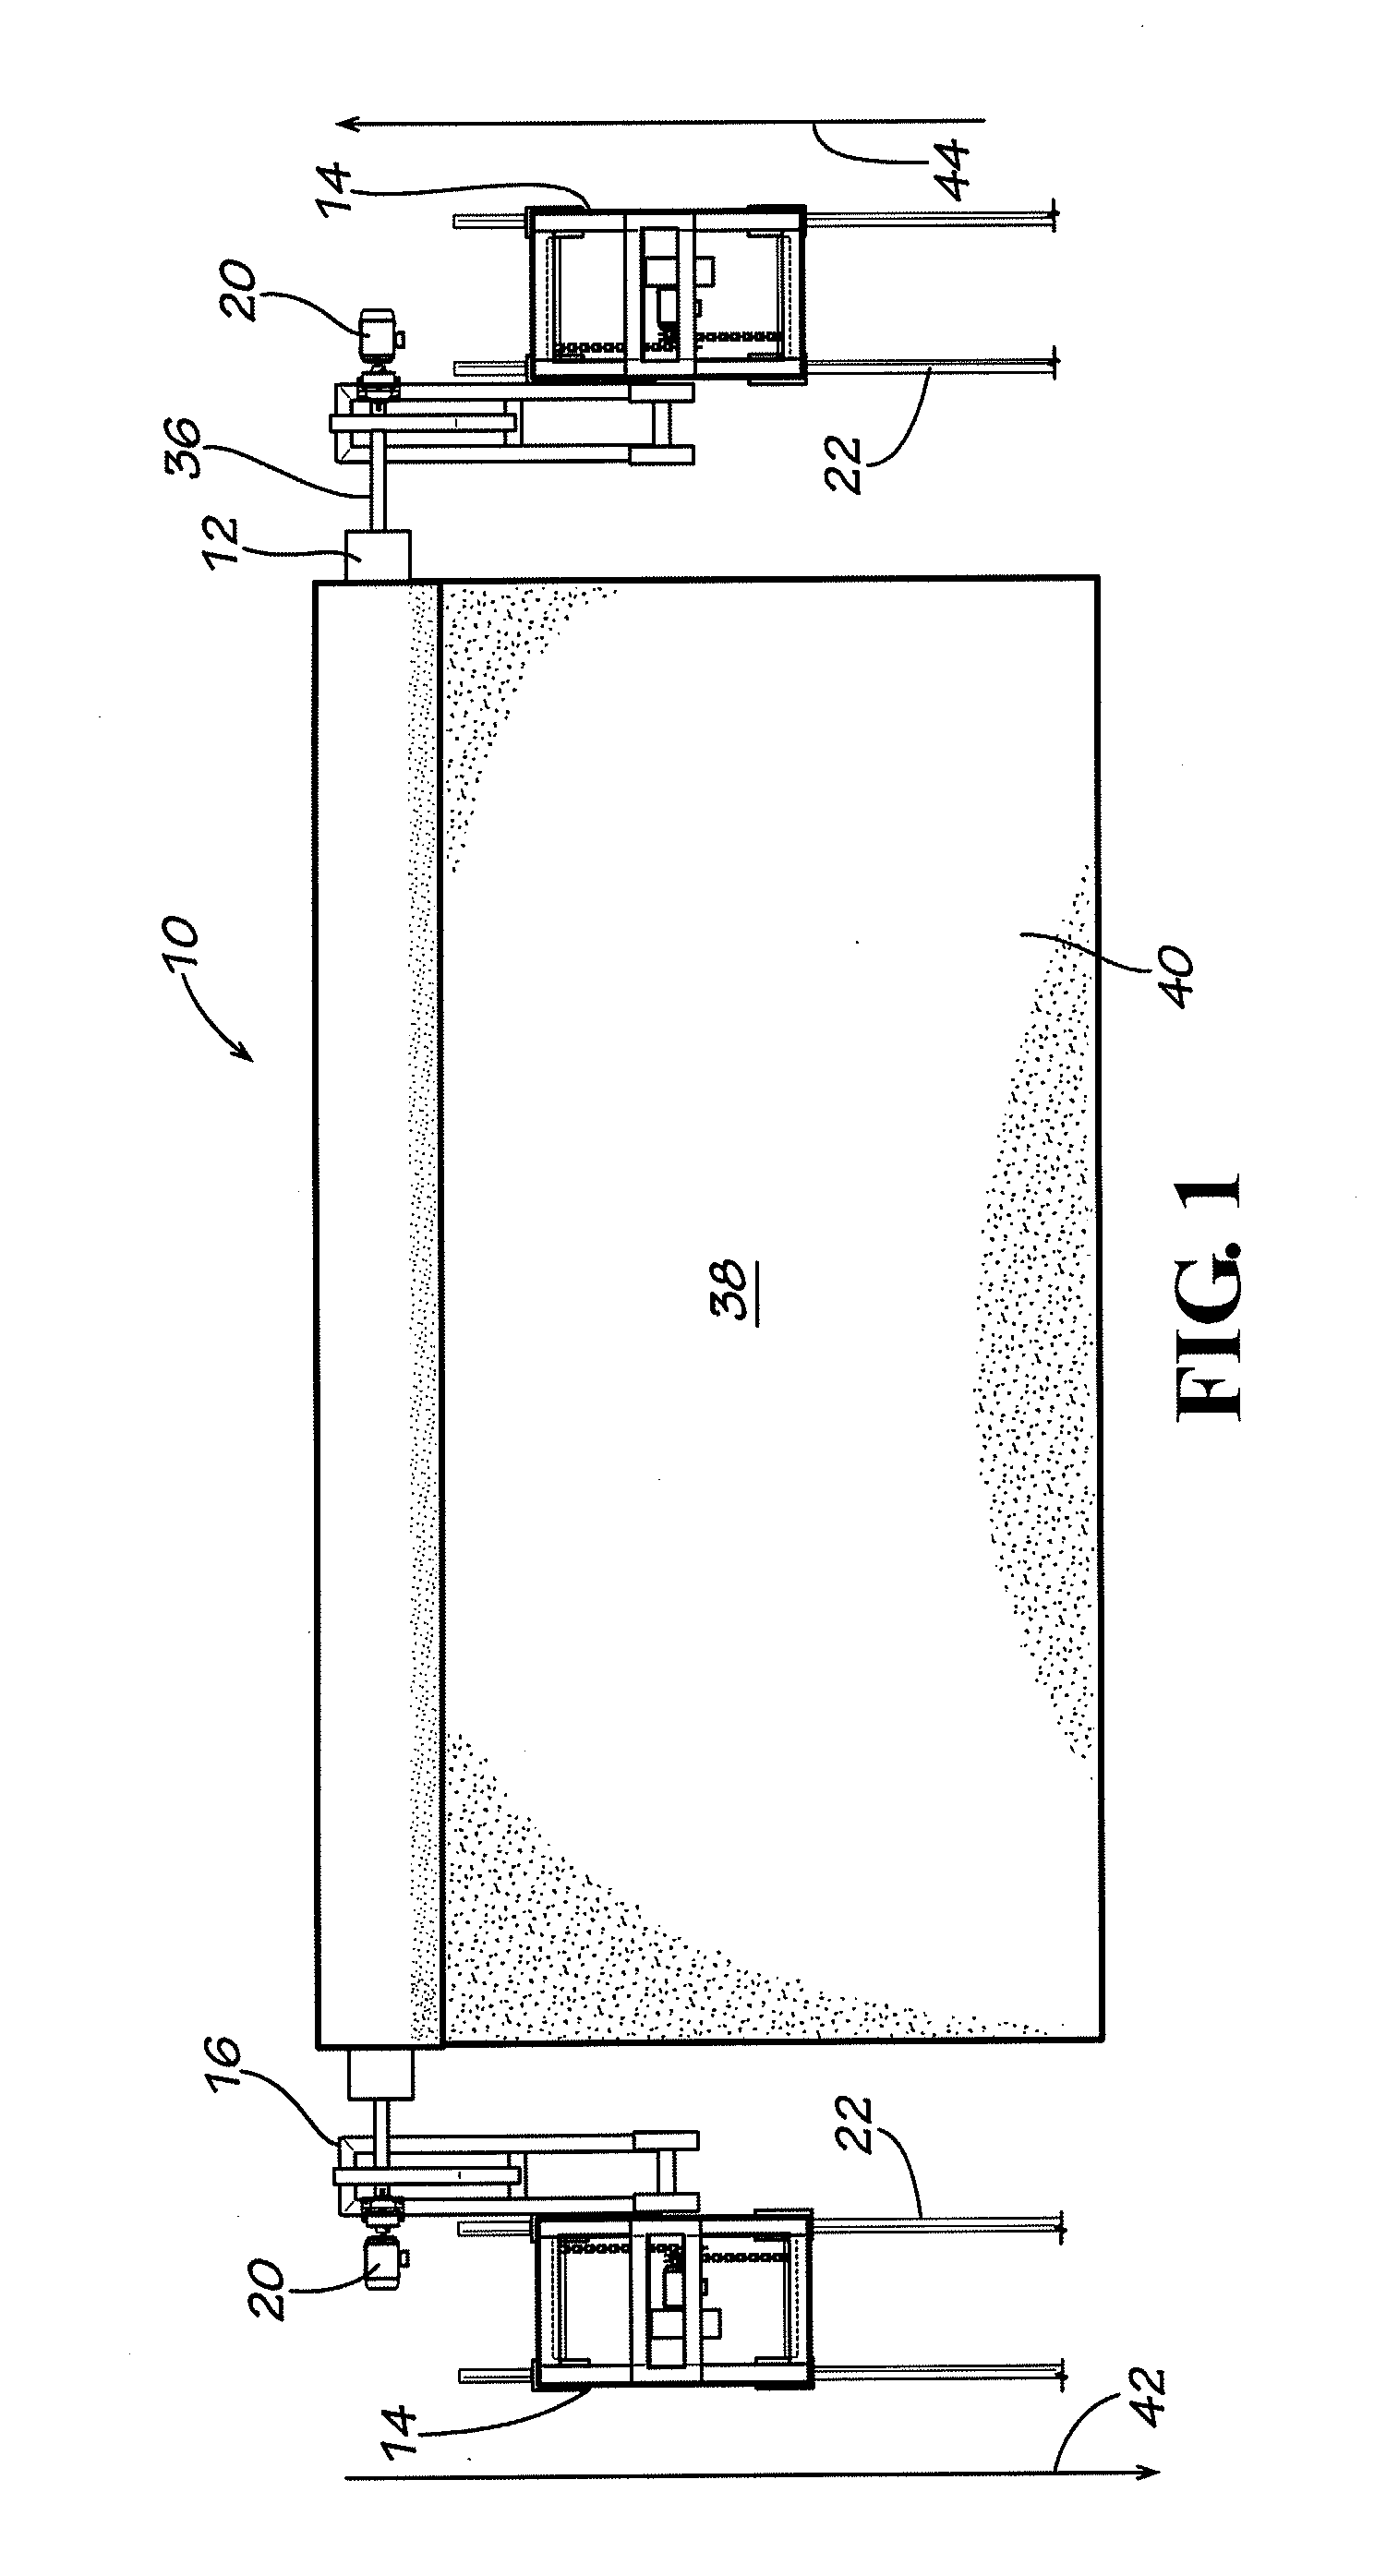 System and Method for Storage and Temporary Installation of Secondary Flooring Surface